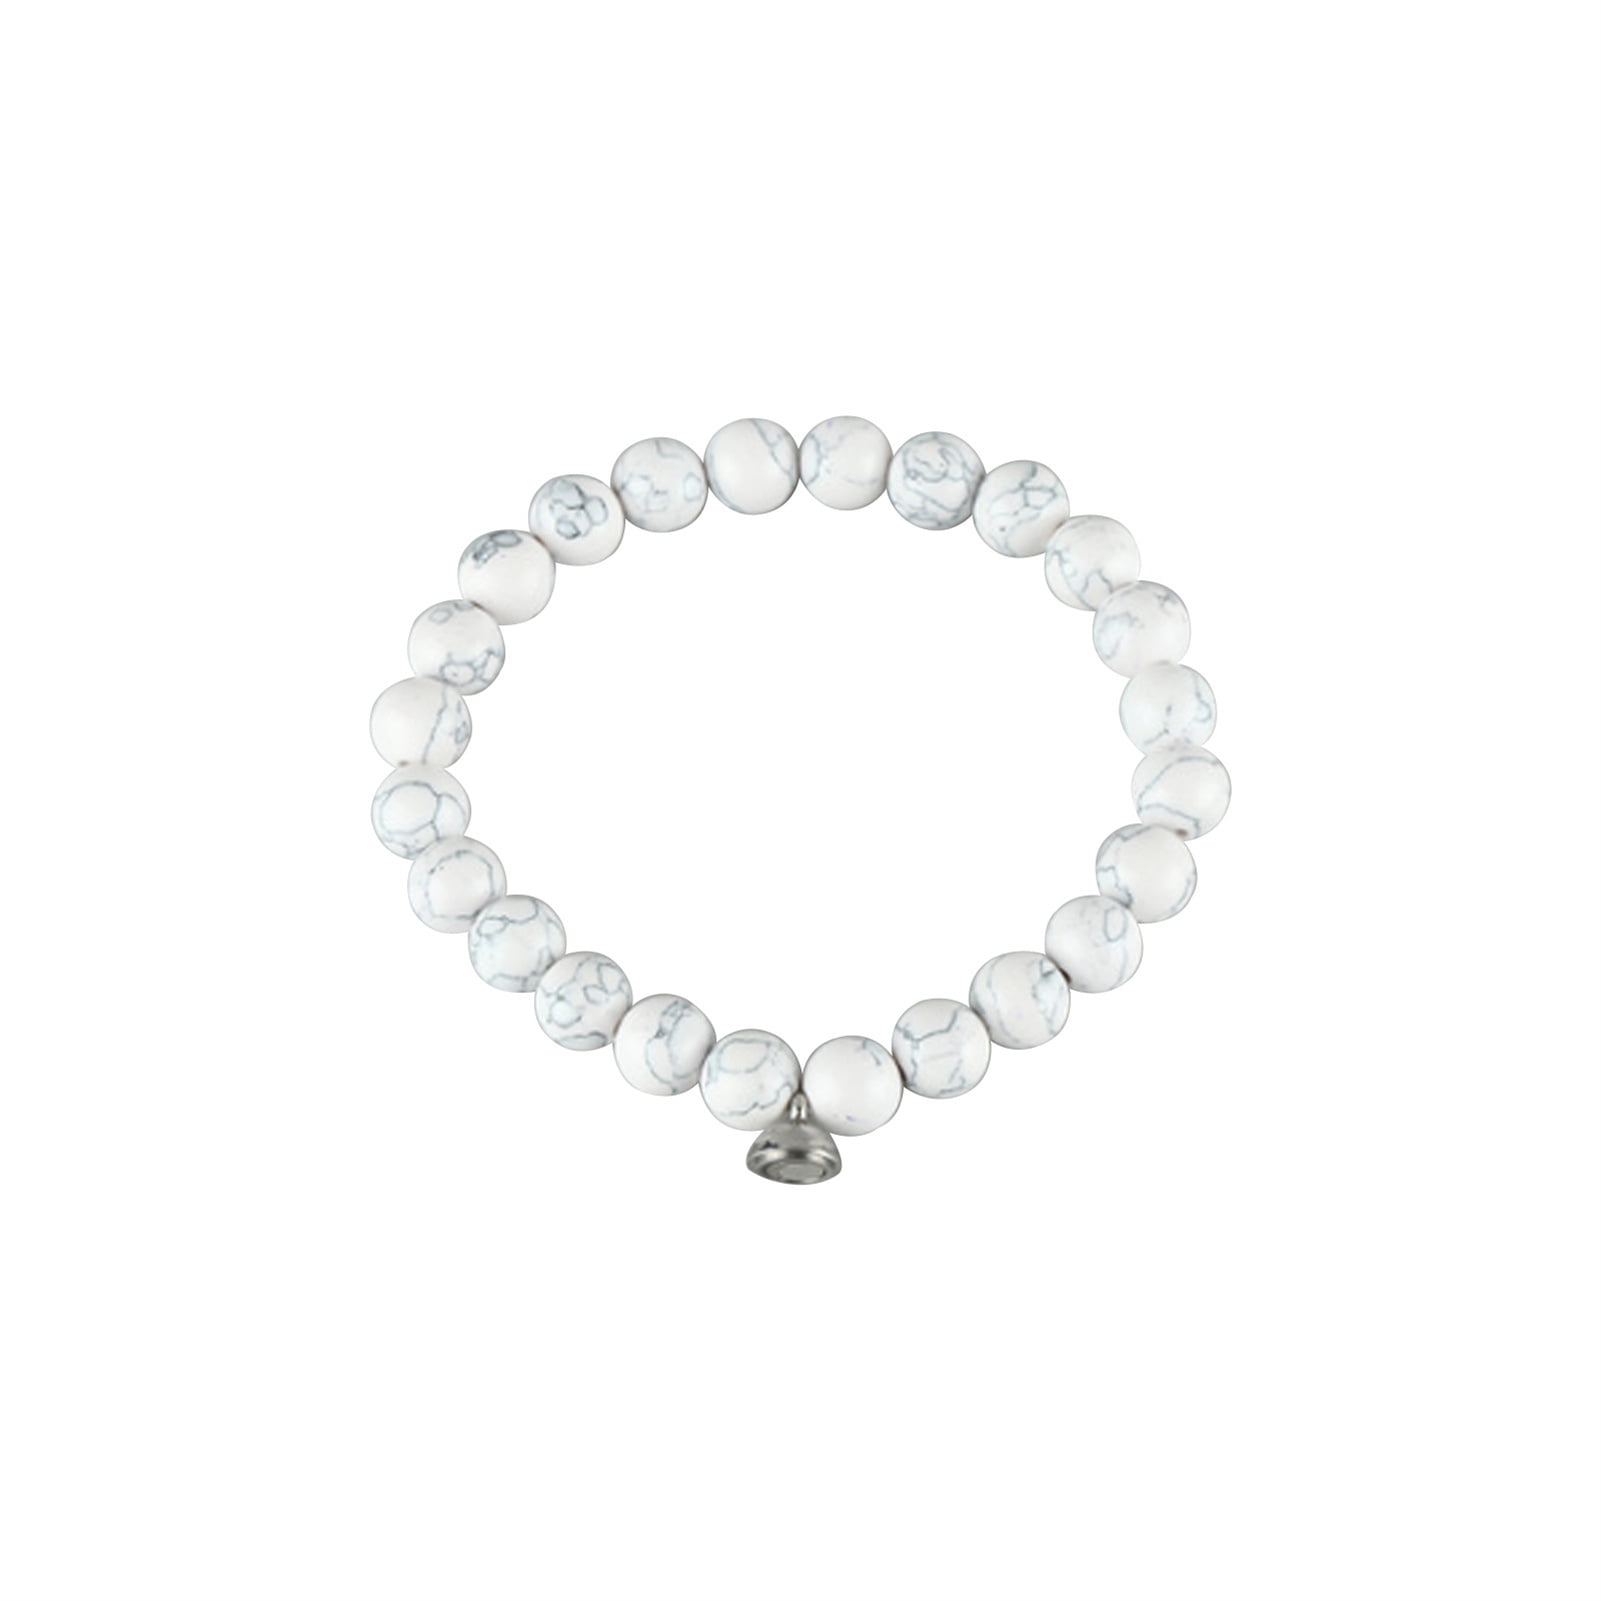 Fashion Simple Round Hollow Personalized Simulate Pearl Bracelet Cool Jewelry 